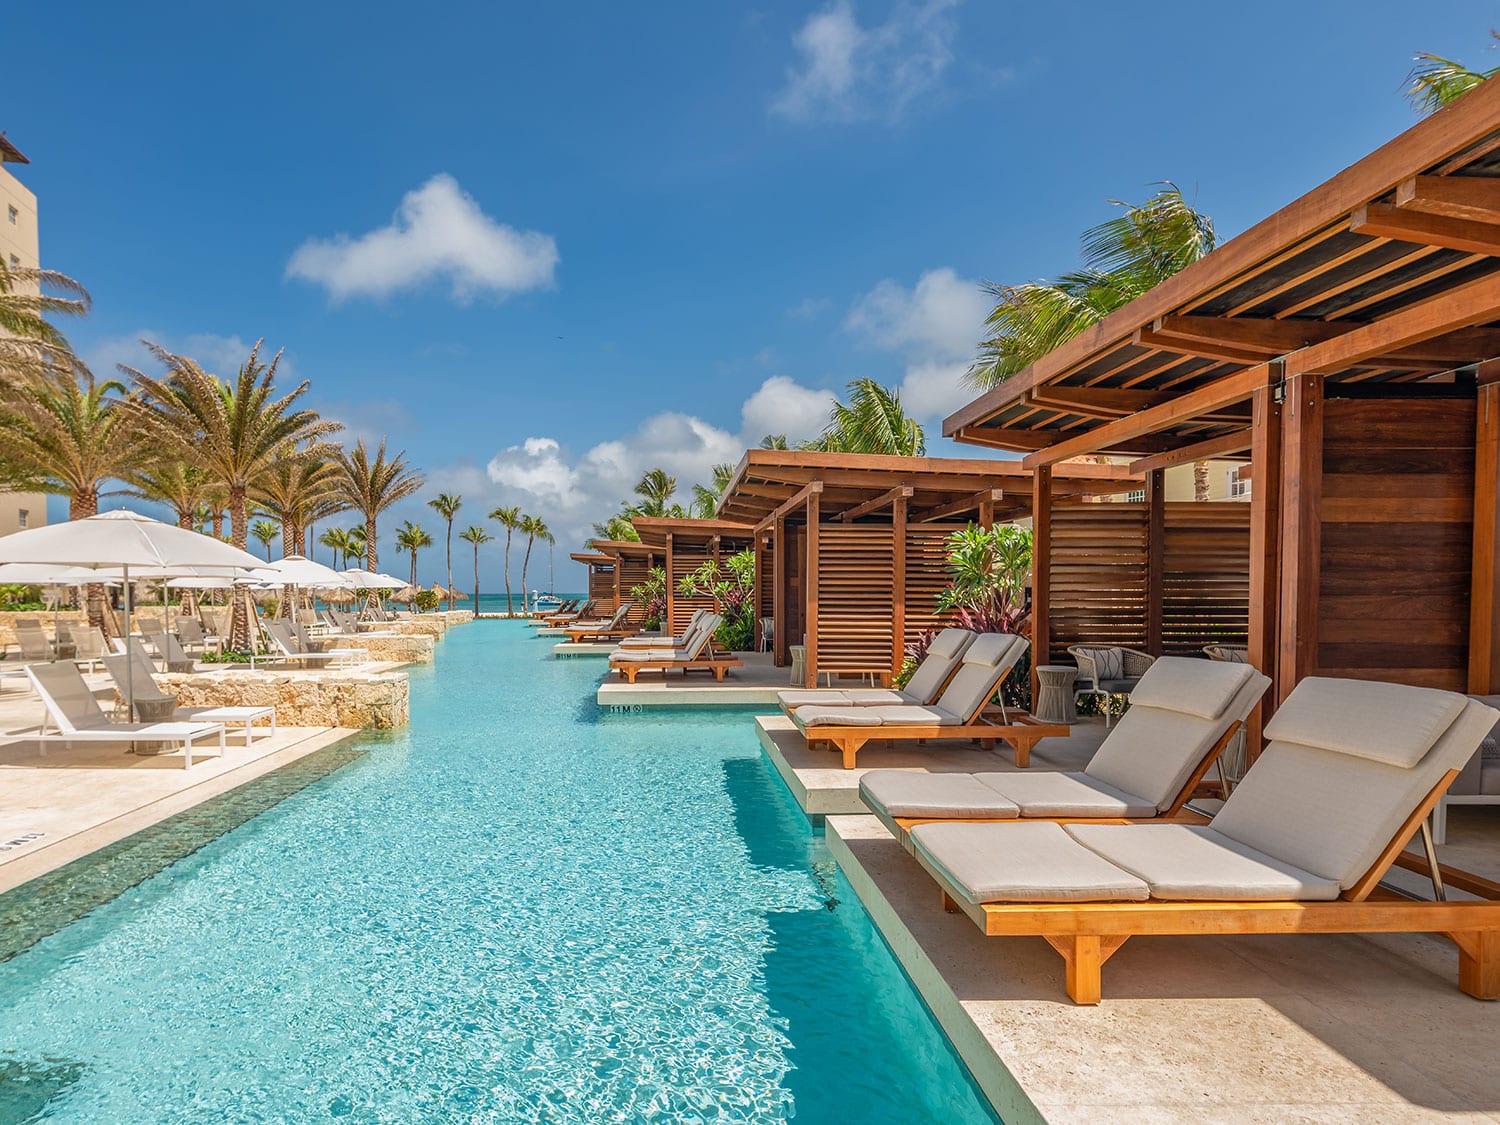 The pool and private cabanas and loungers at Hyatt Regency Aruba Resort Spa and Casino.